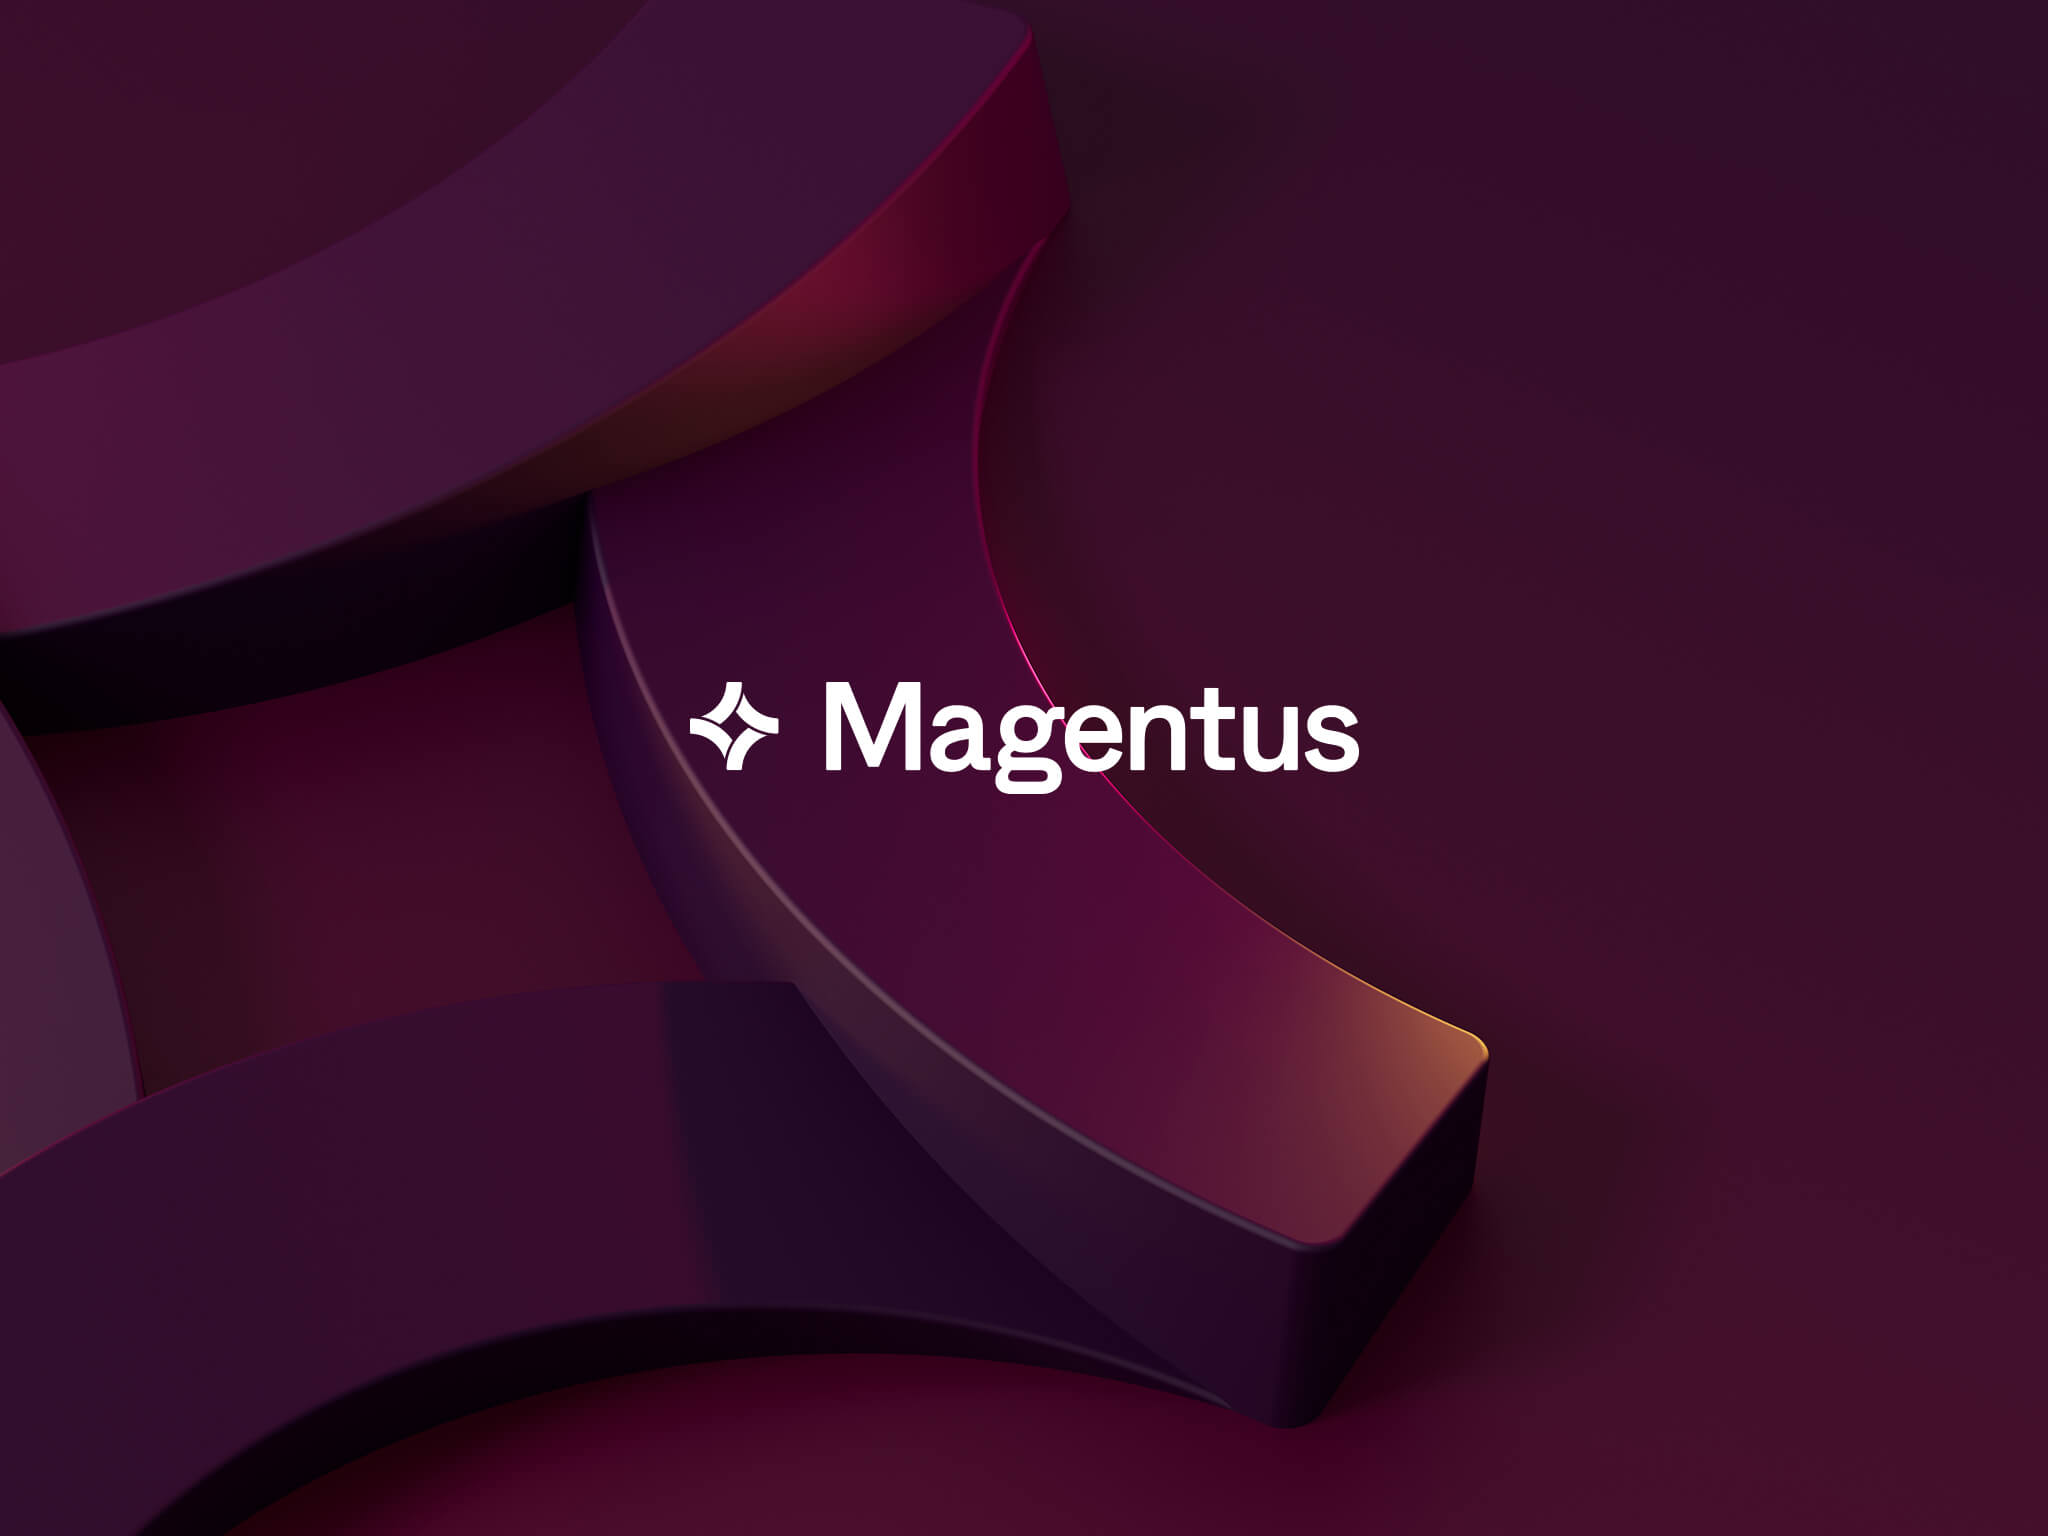 Magentus: Empowering Intelligent Healthcare — A New Brand Developed and Launched by Someone